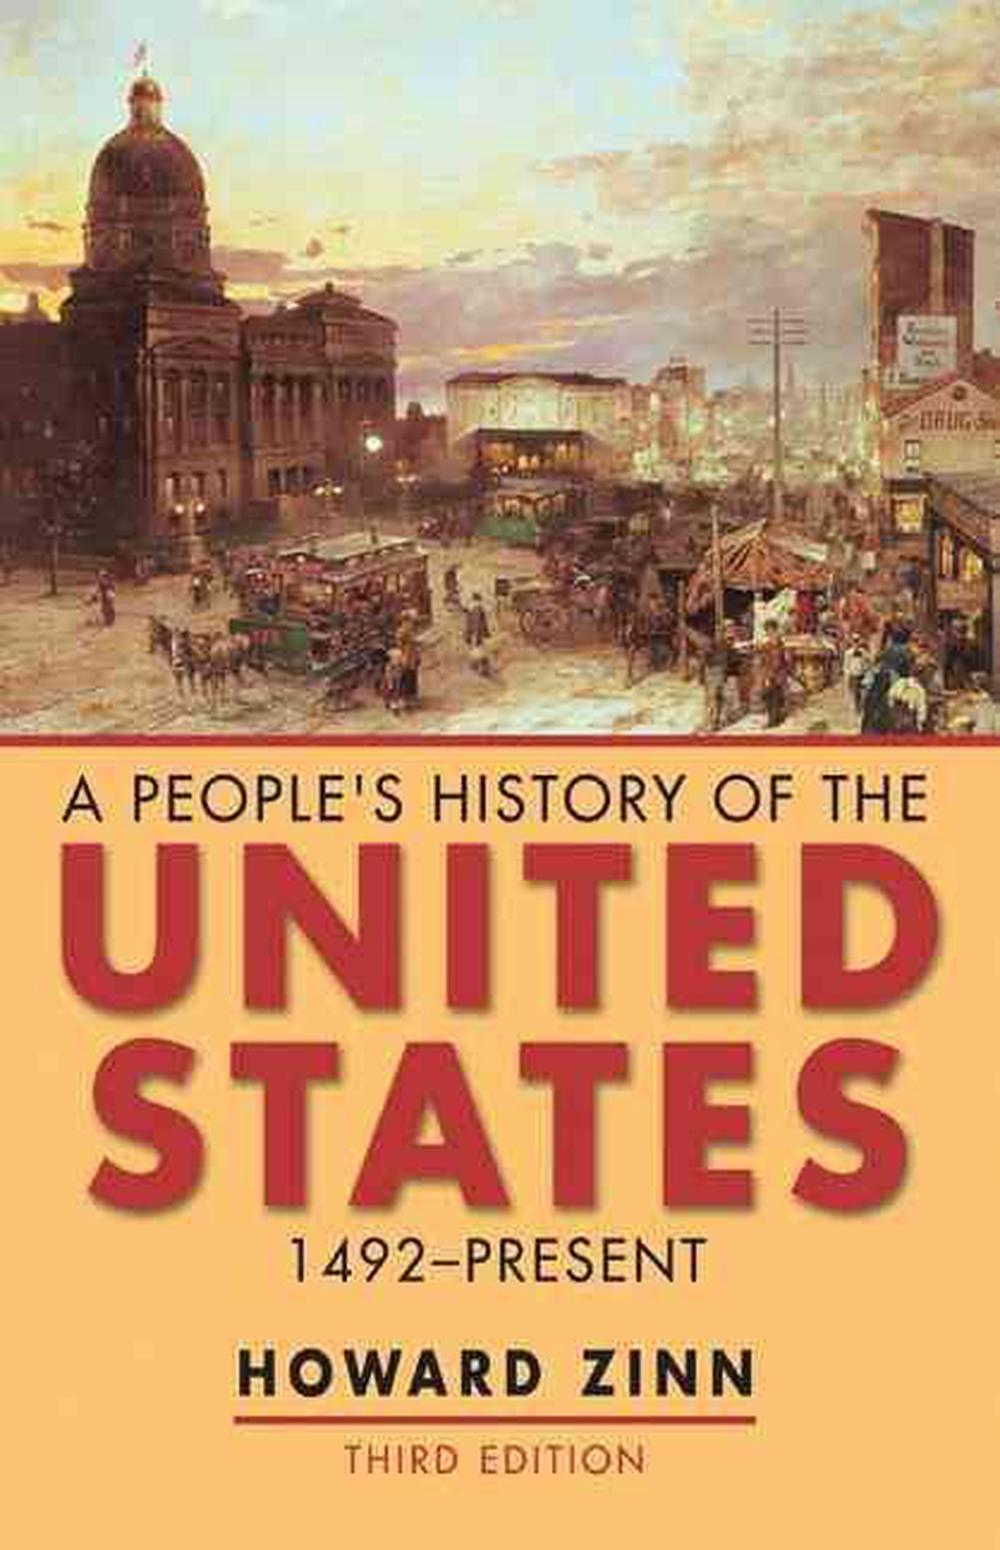 book review a people's history of the united states